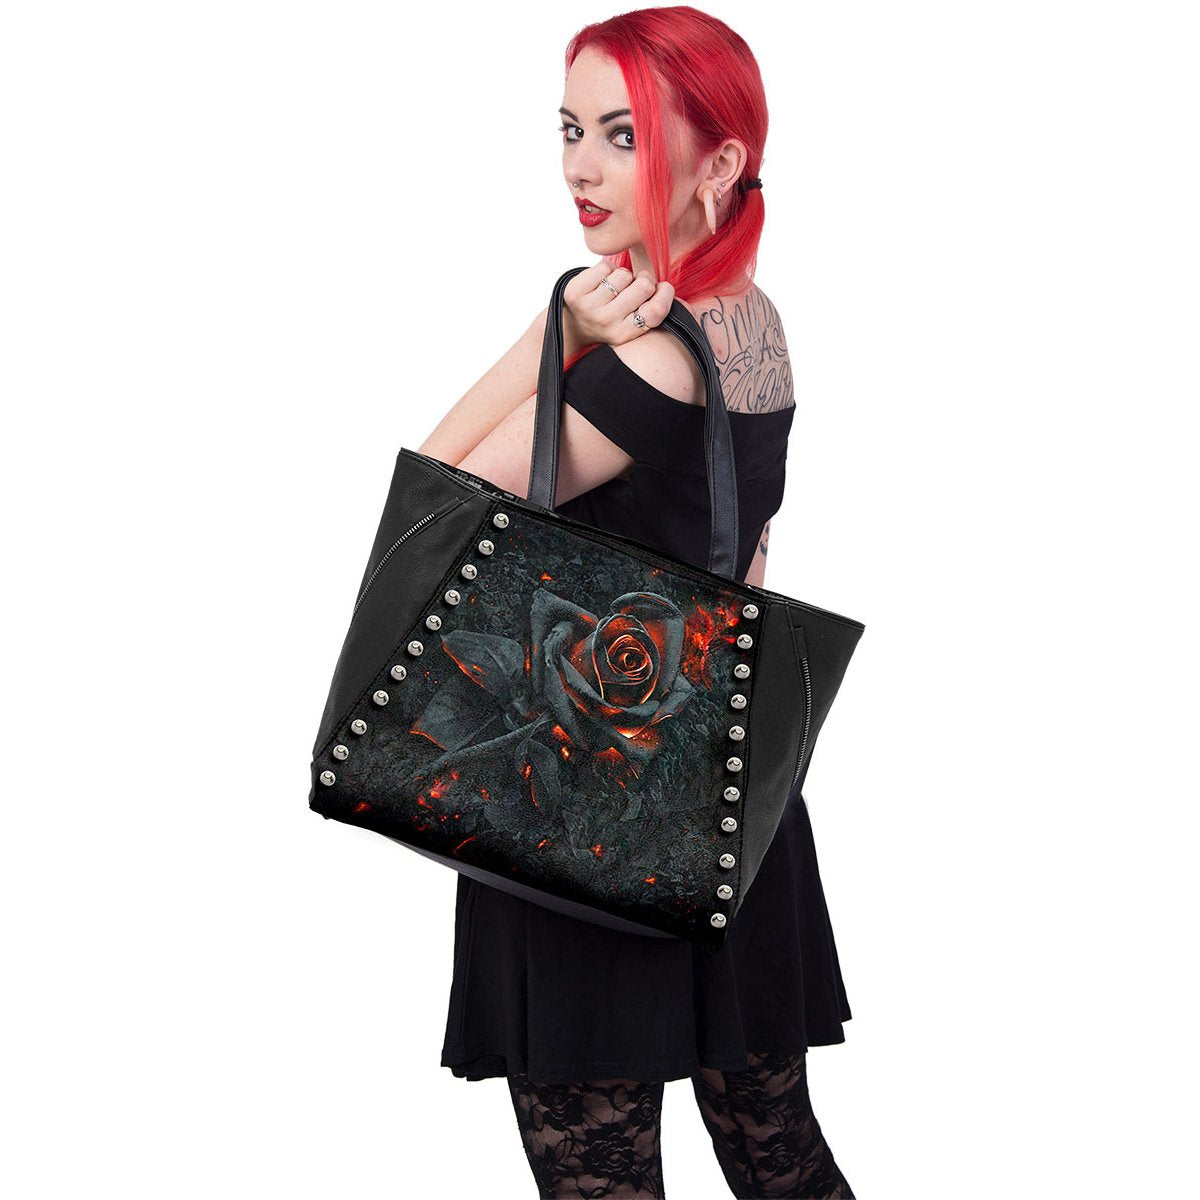 BURNT ROSE - Tote Bag - Top quality PU Leather Studded - Spiral USA